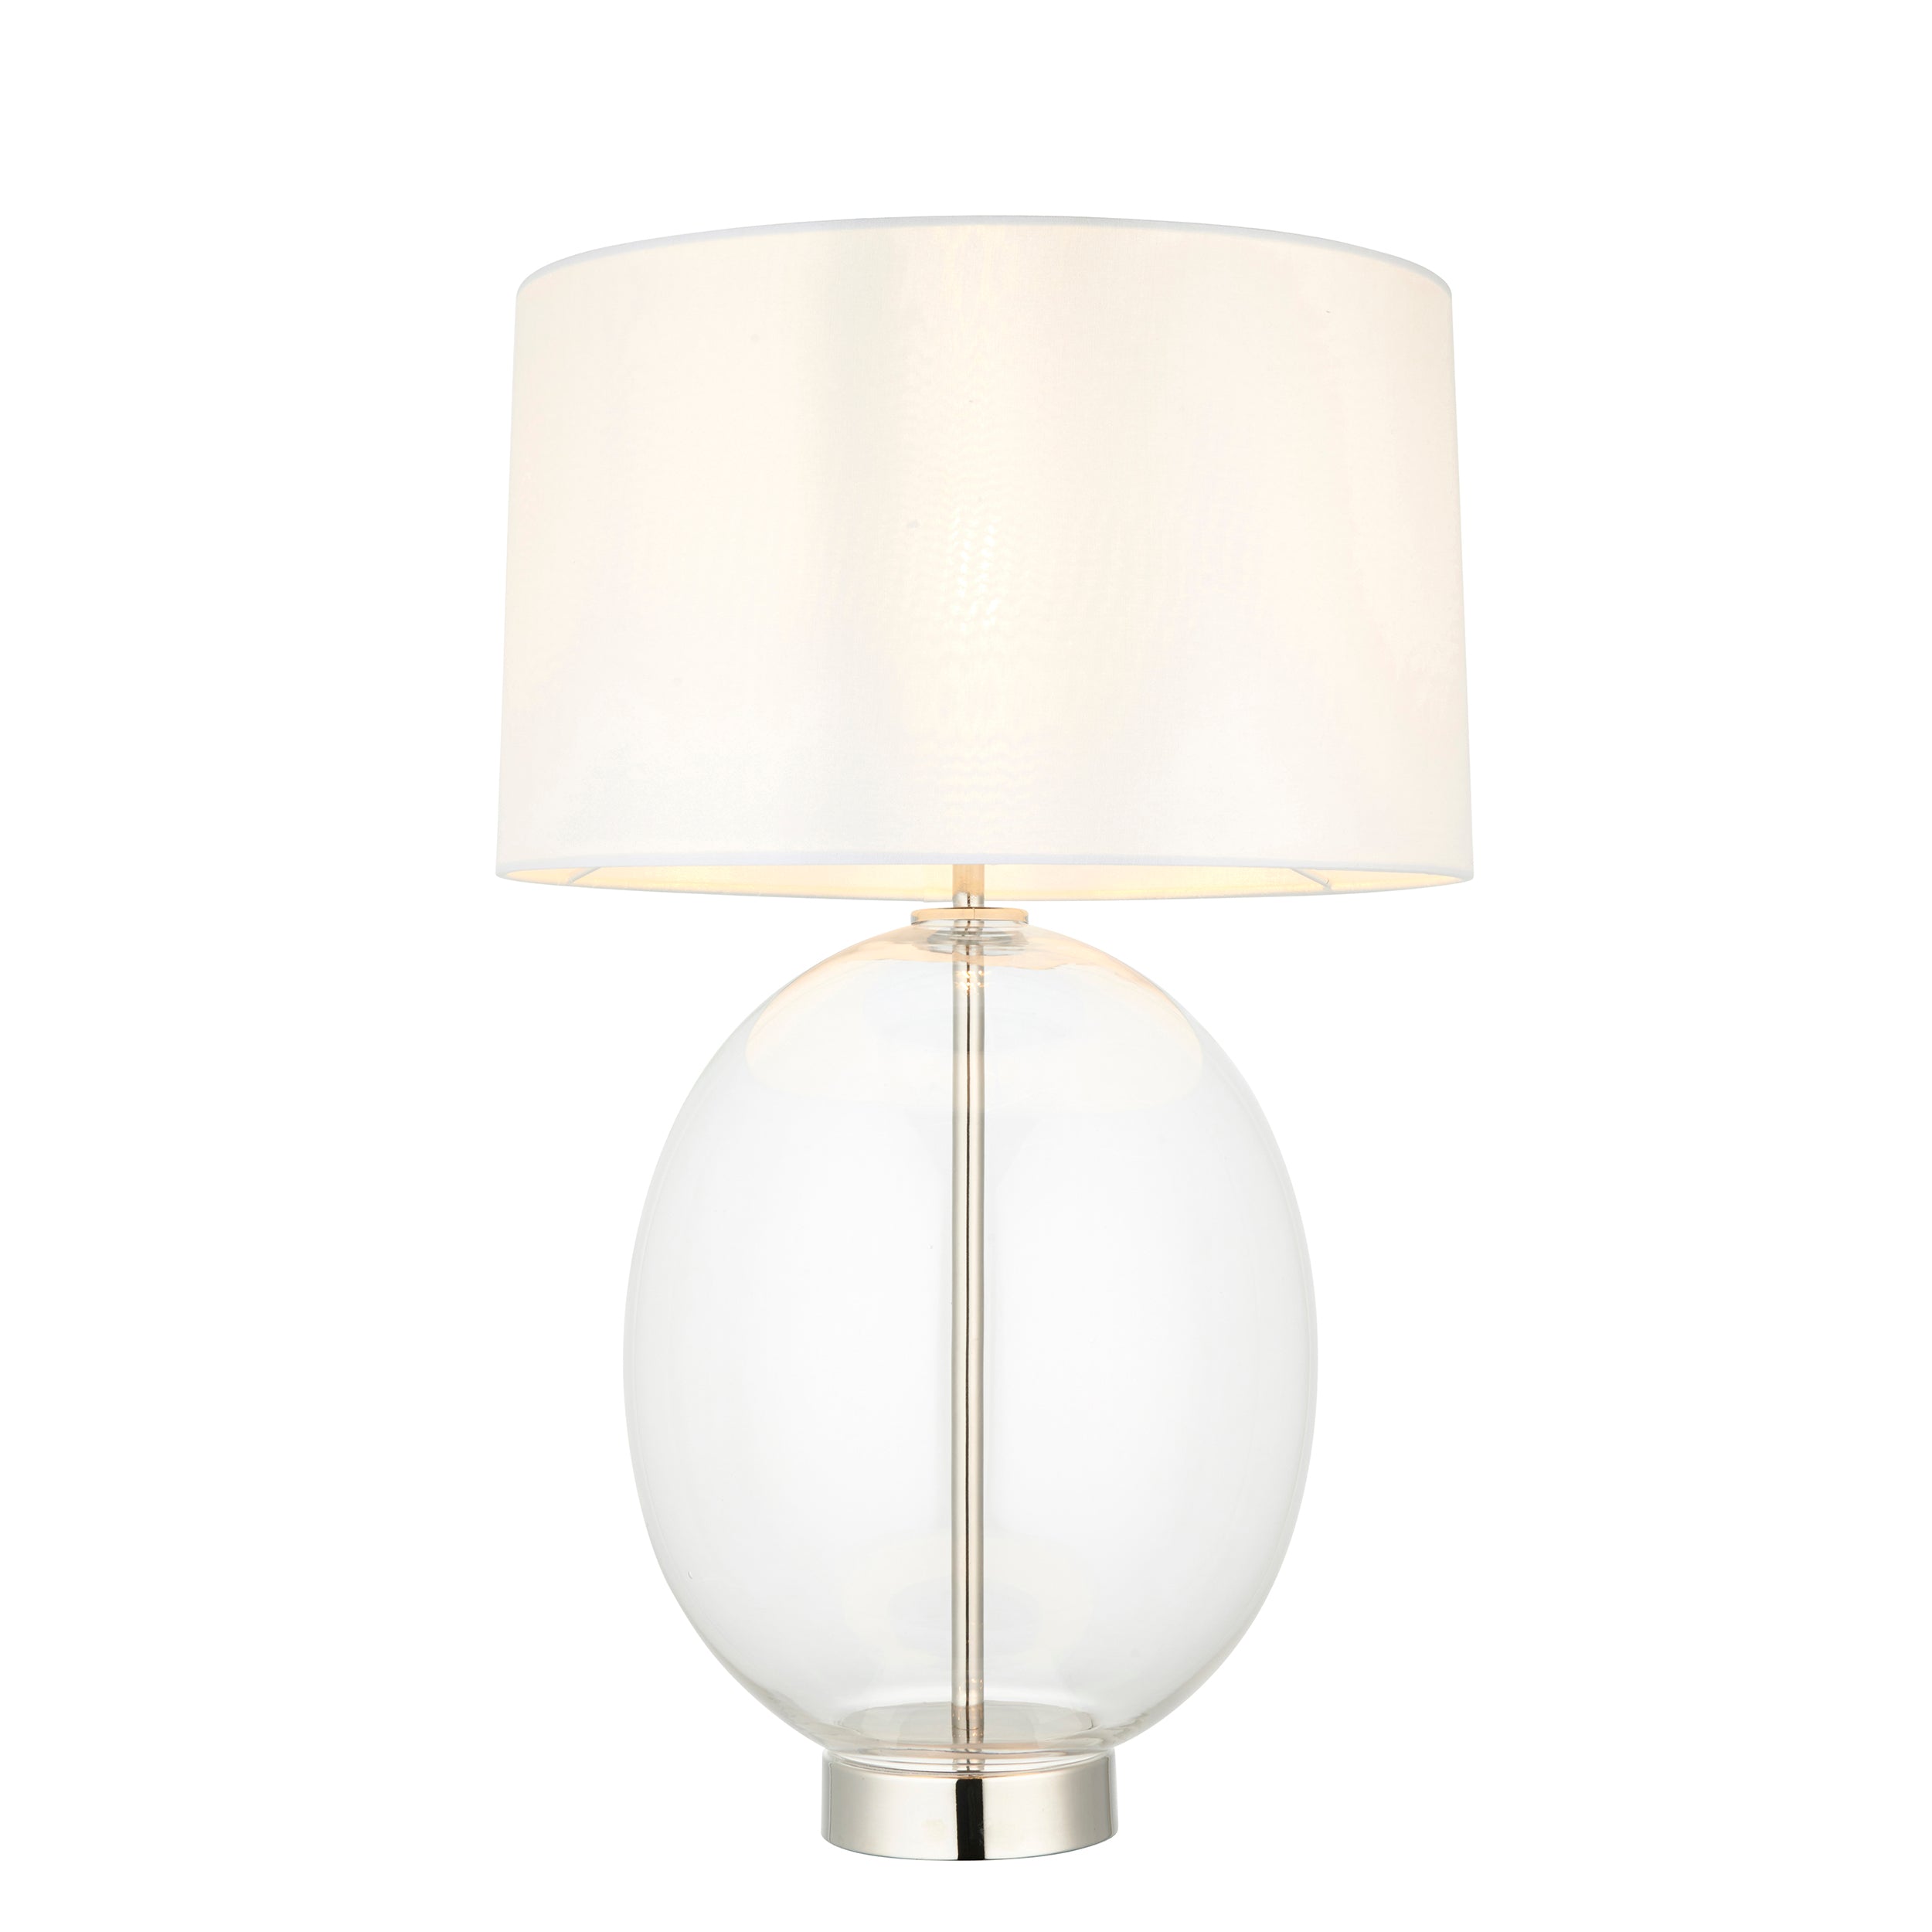 Lightologist Bright nickel plate & clear glass with vintage white fabric Complete Table Light WIN13102675